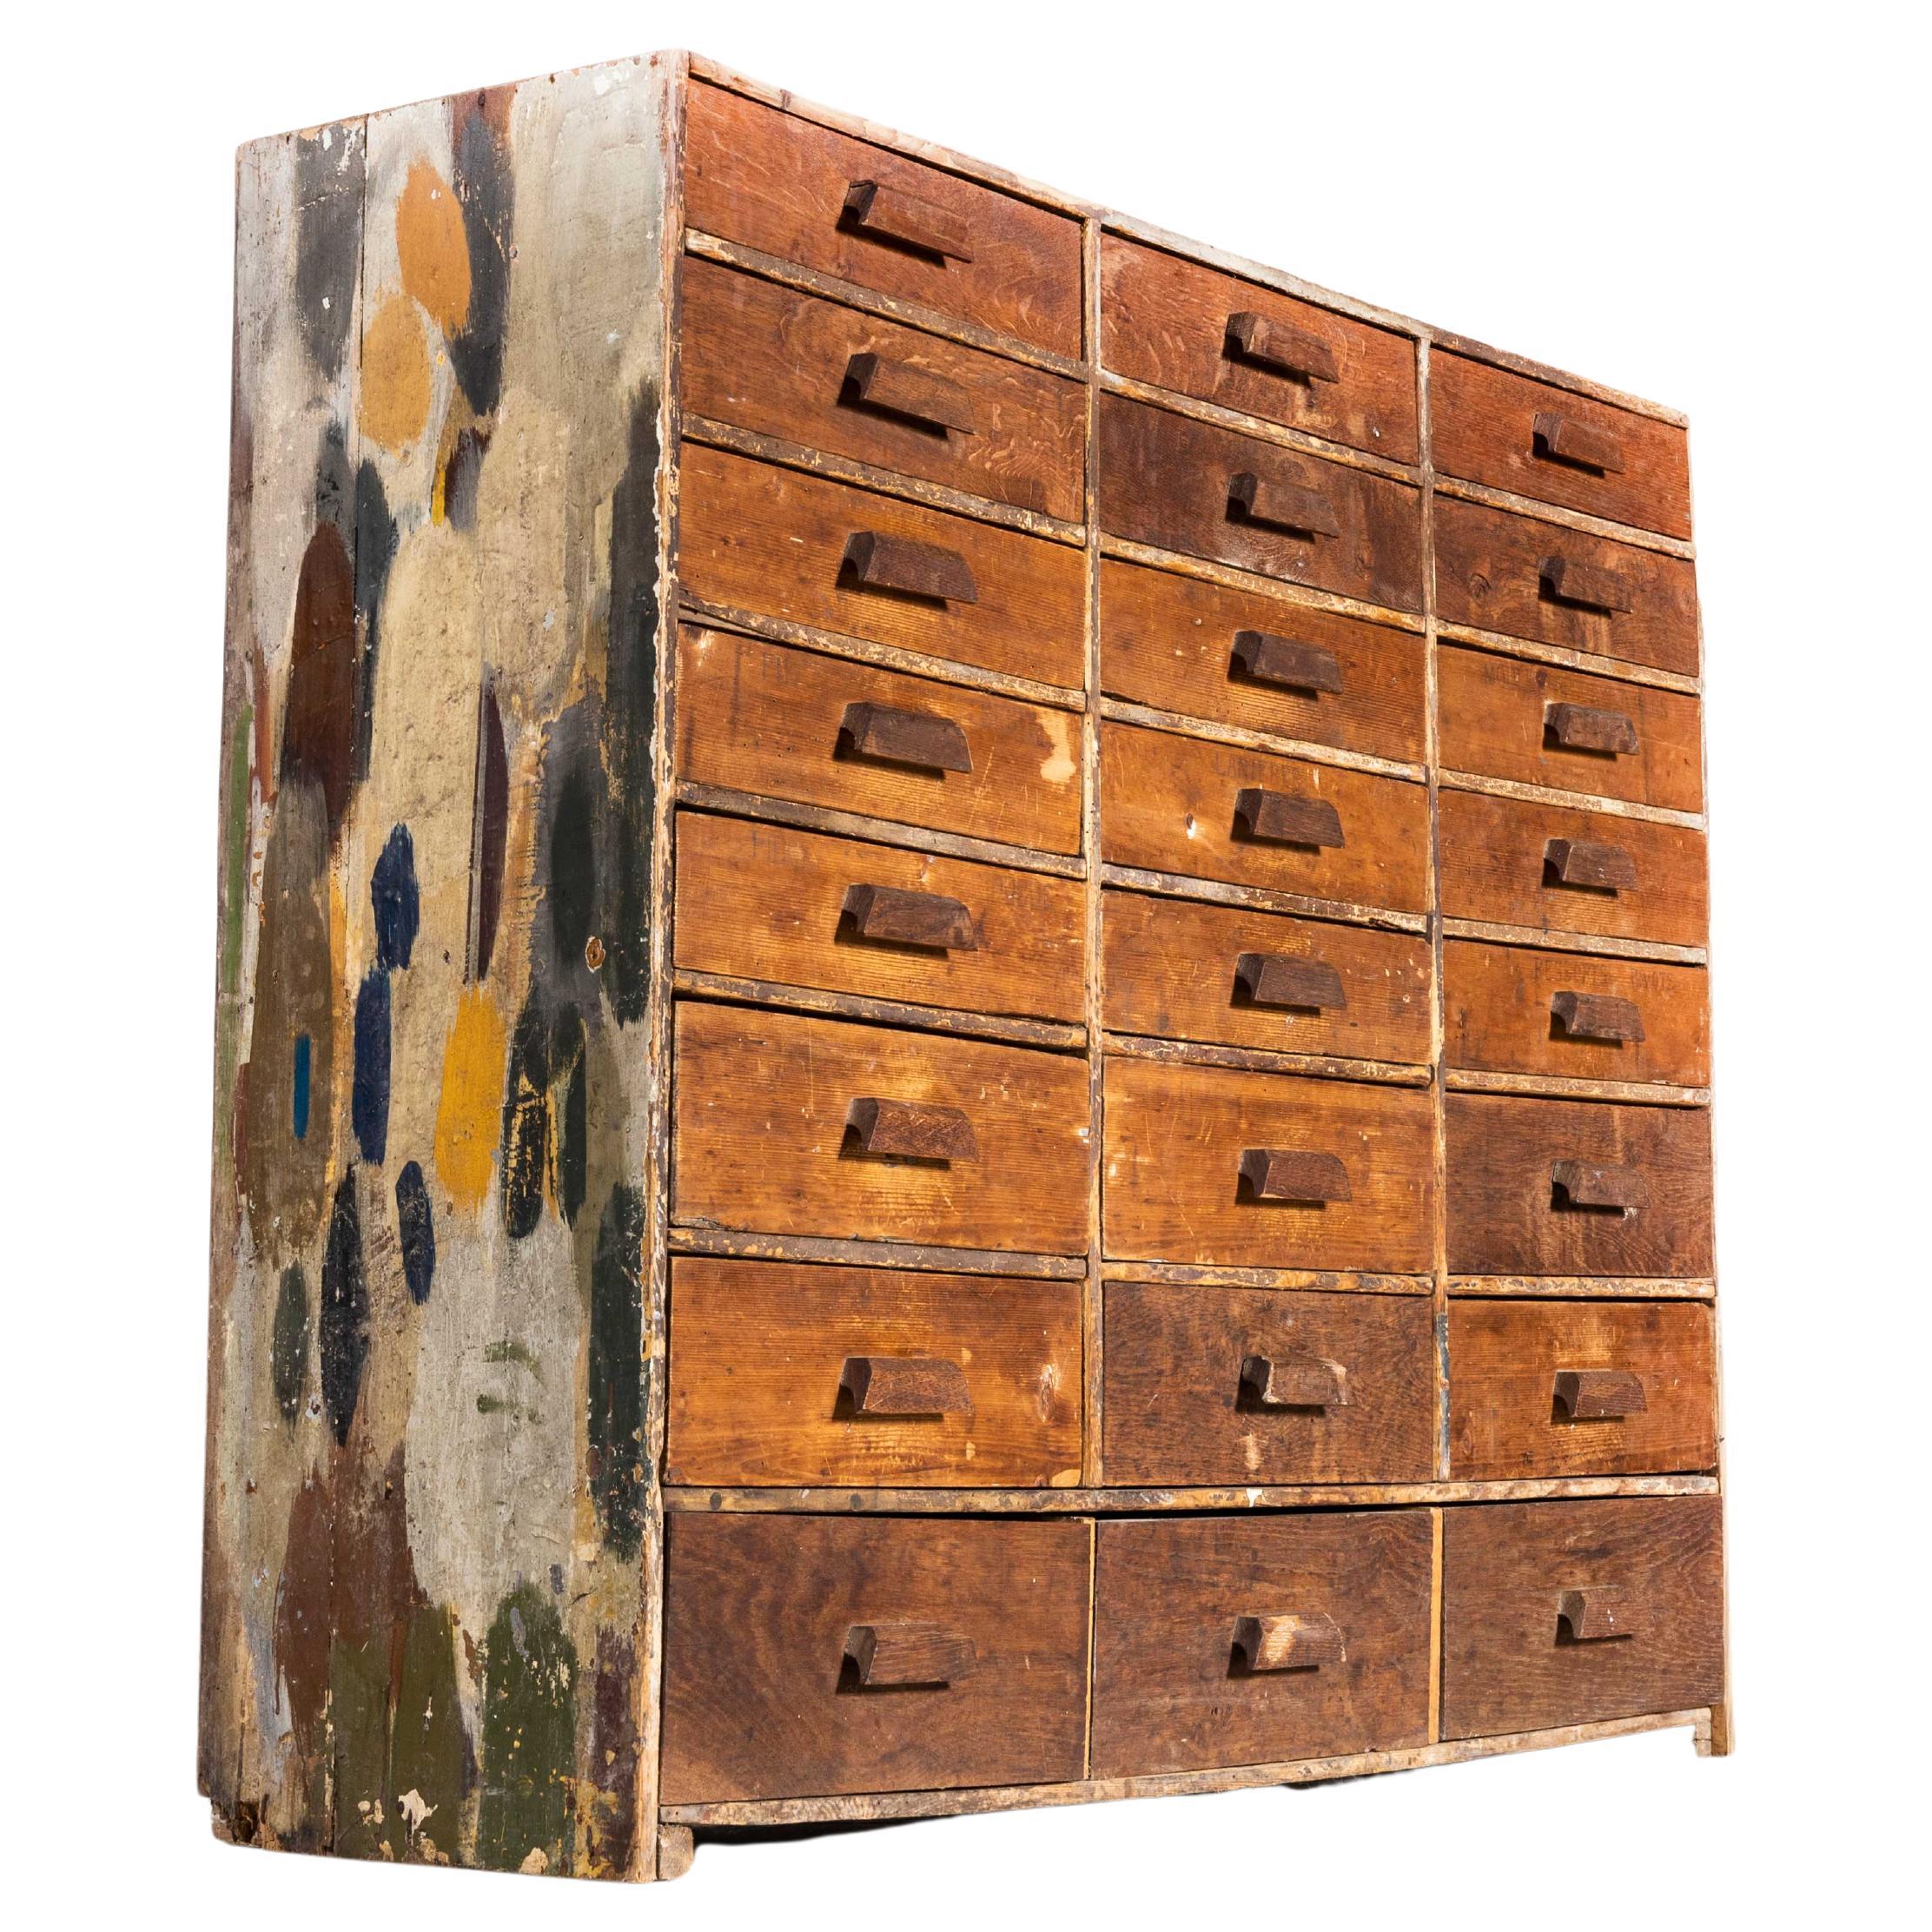 1950s French Bank of Workshop Drawers, Twenty Four Drawers